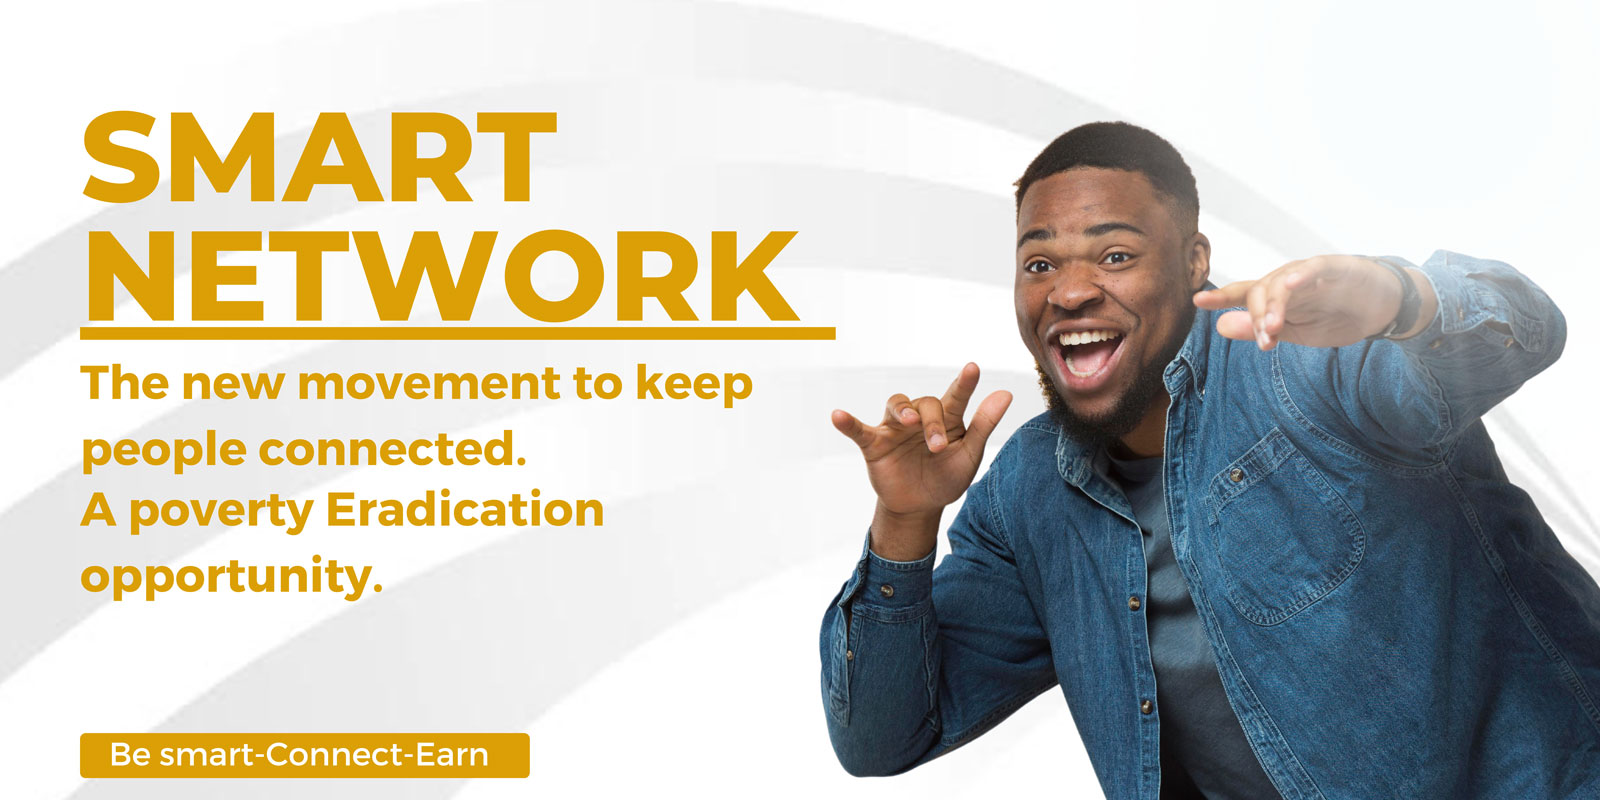 smartnetwork Review – Is smartnetwork.ng Legit Or Scam